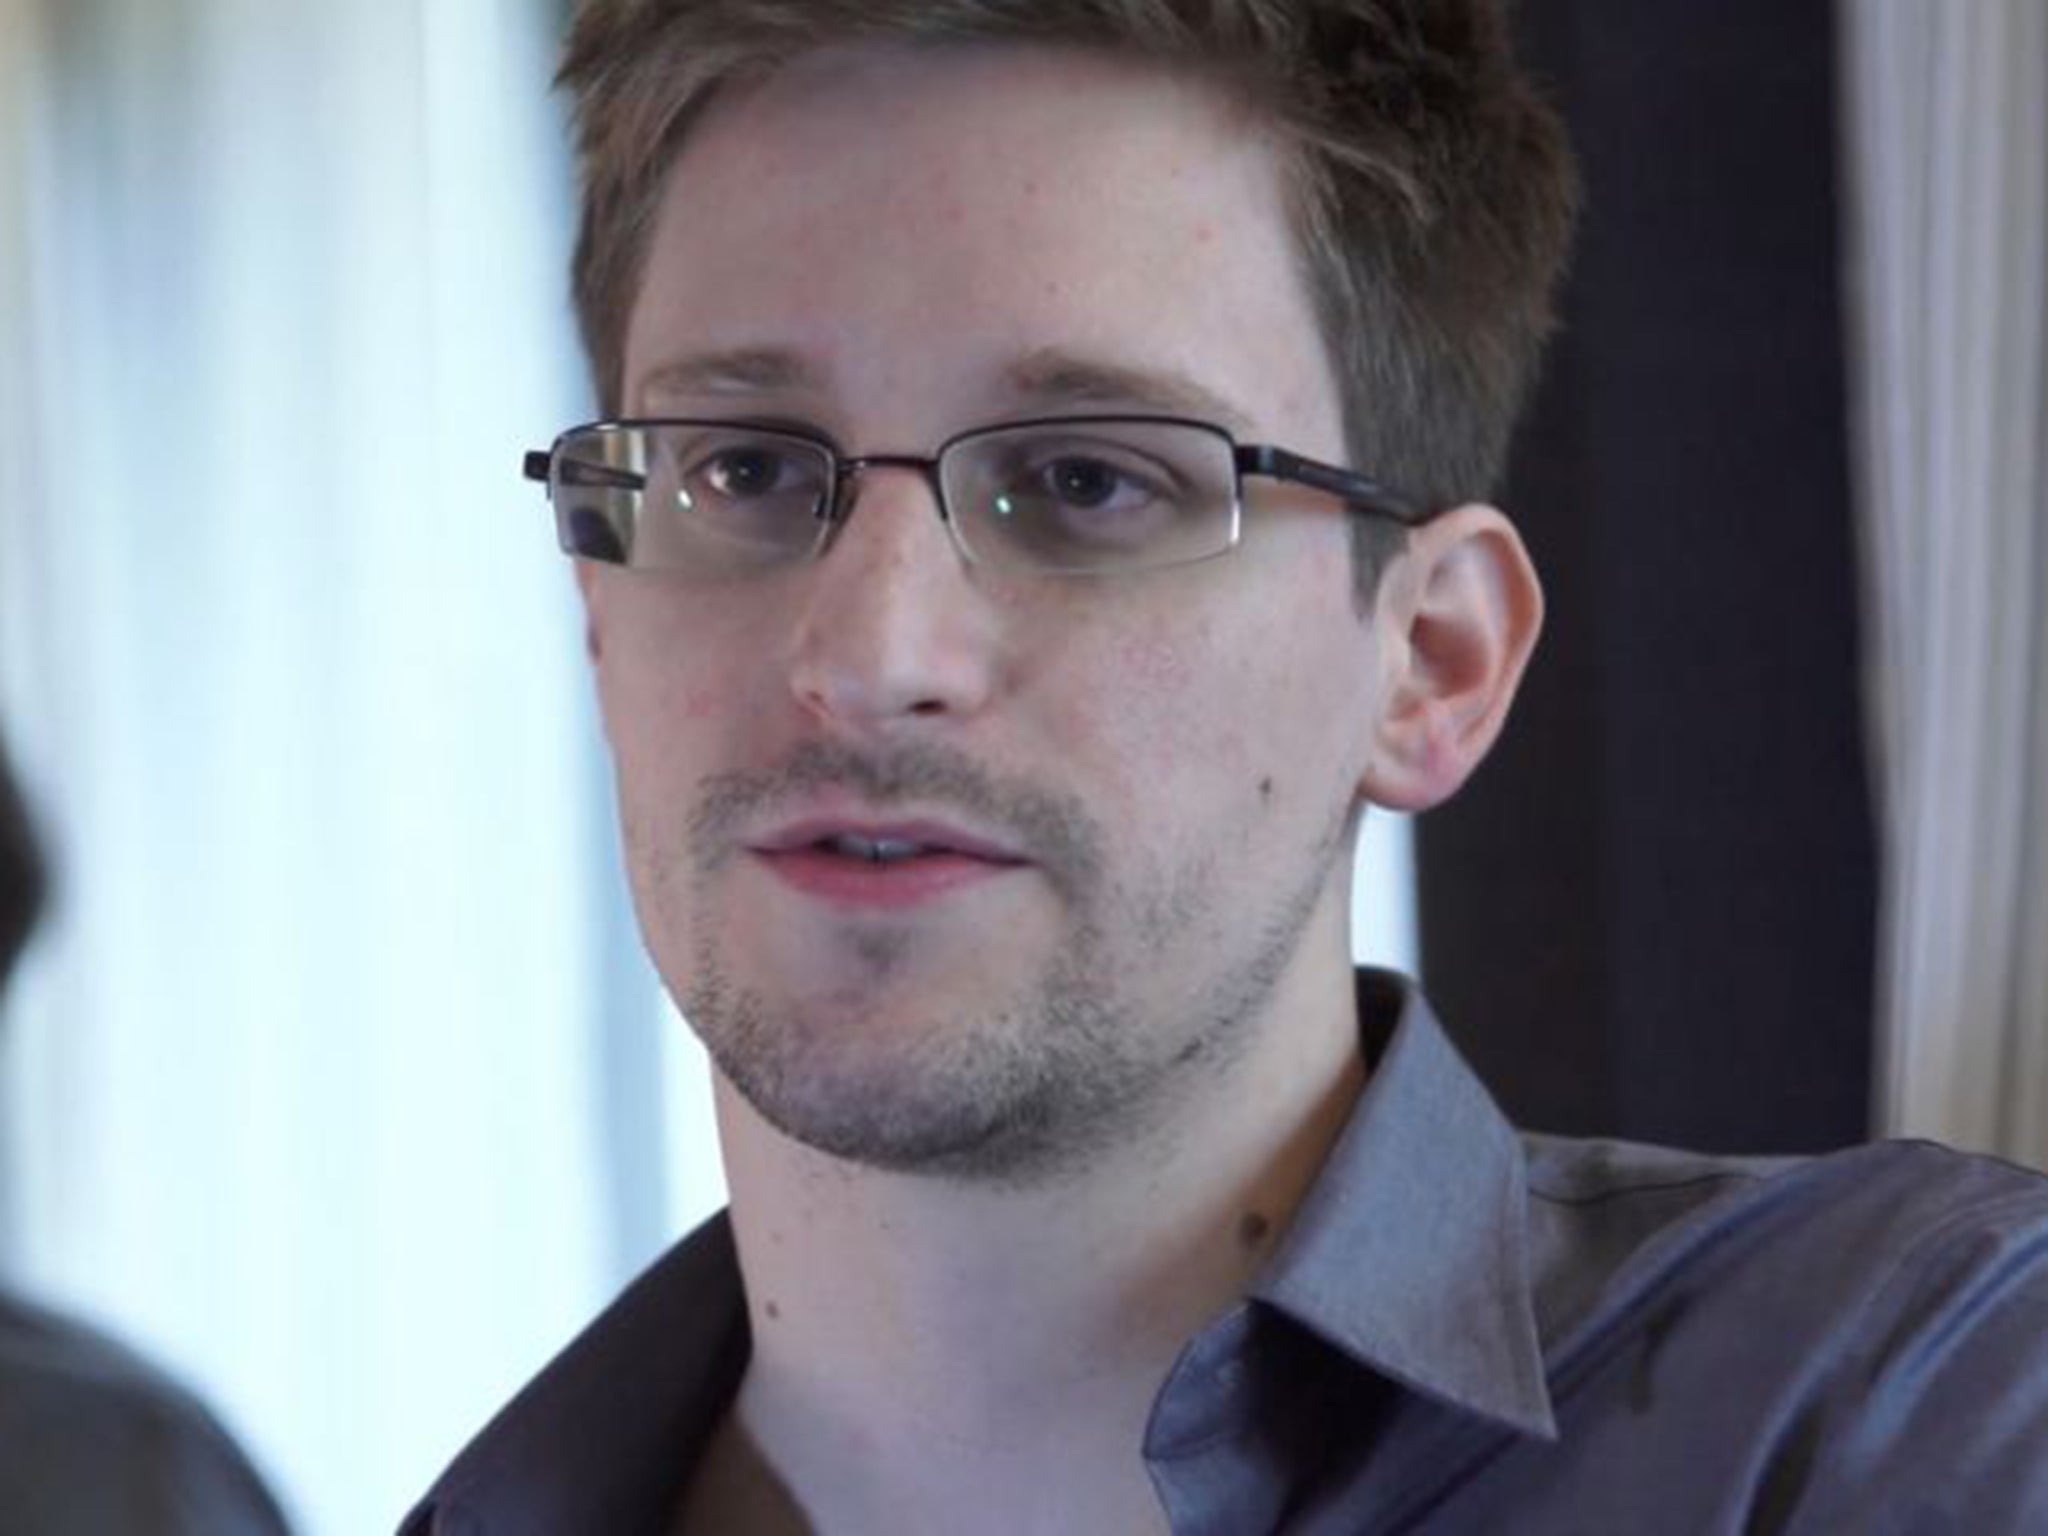 Snowden has made a few personal admissions on Twitter